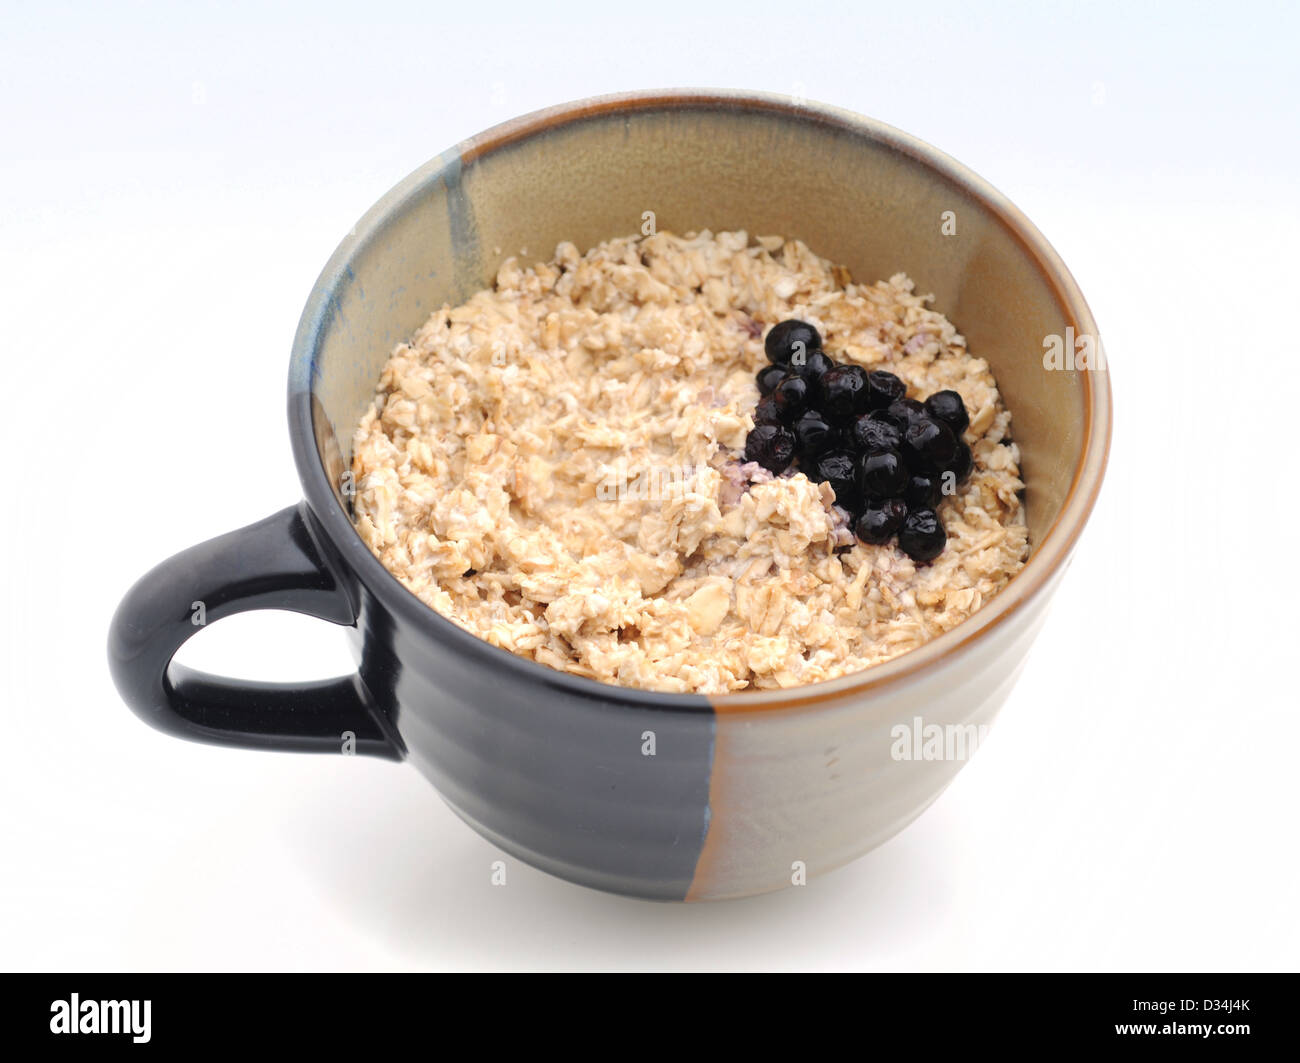 Blueberries and oatmeal for a snack or breakfast Stock Photo